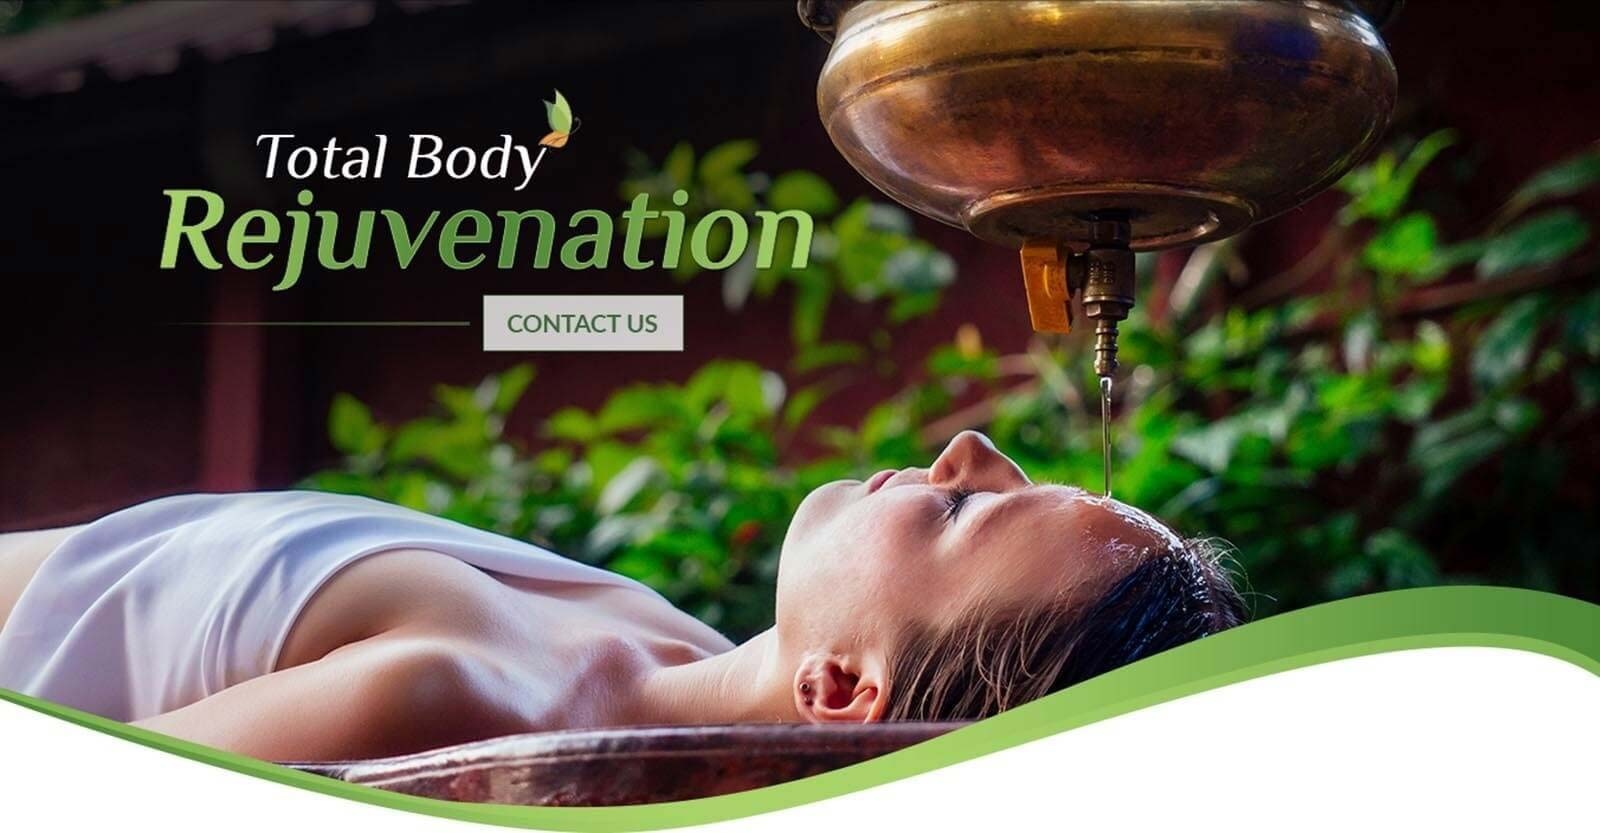 Total Body Rejuvenation at Ayurvedic Wellness Centers in Canada